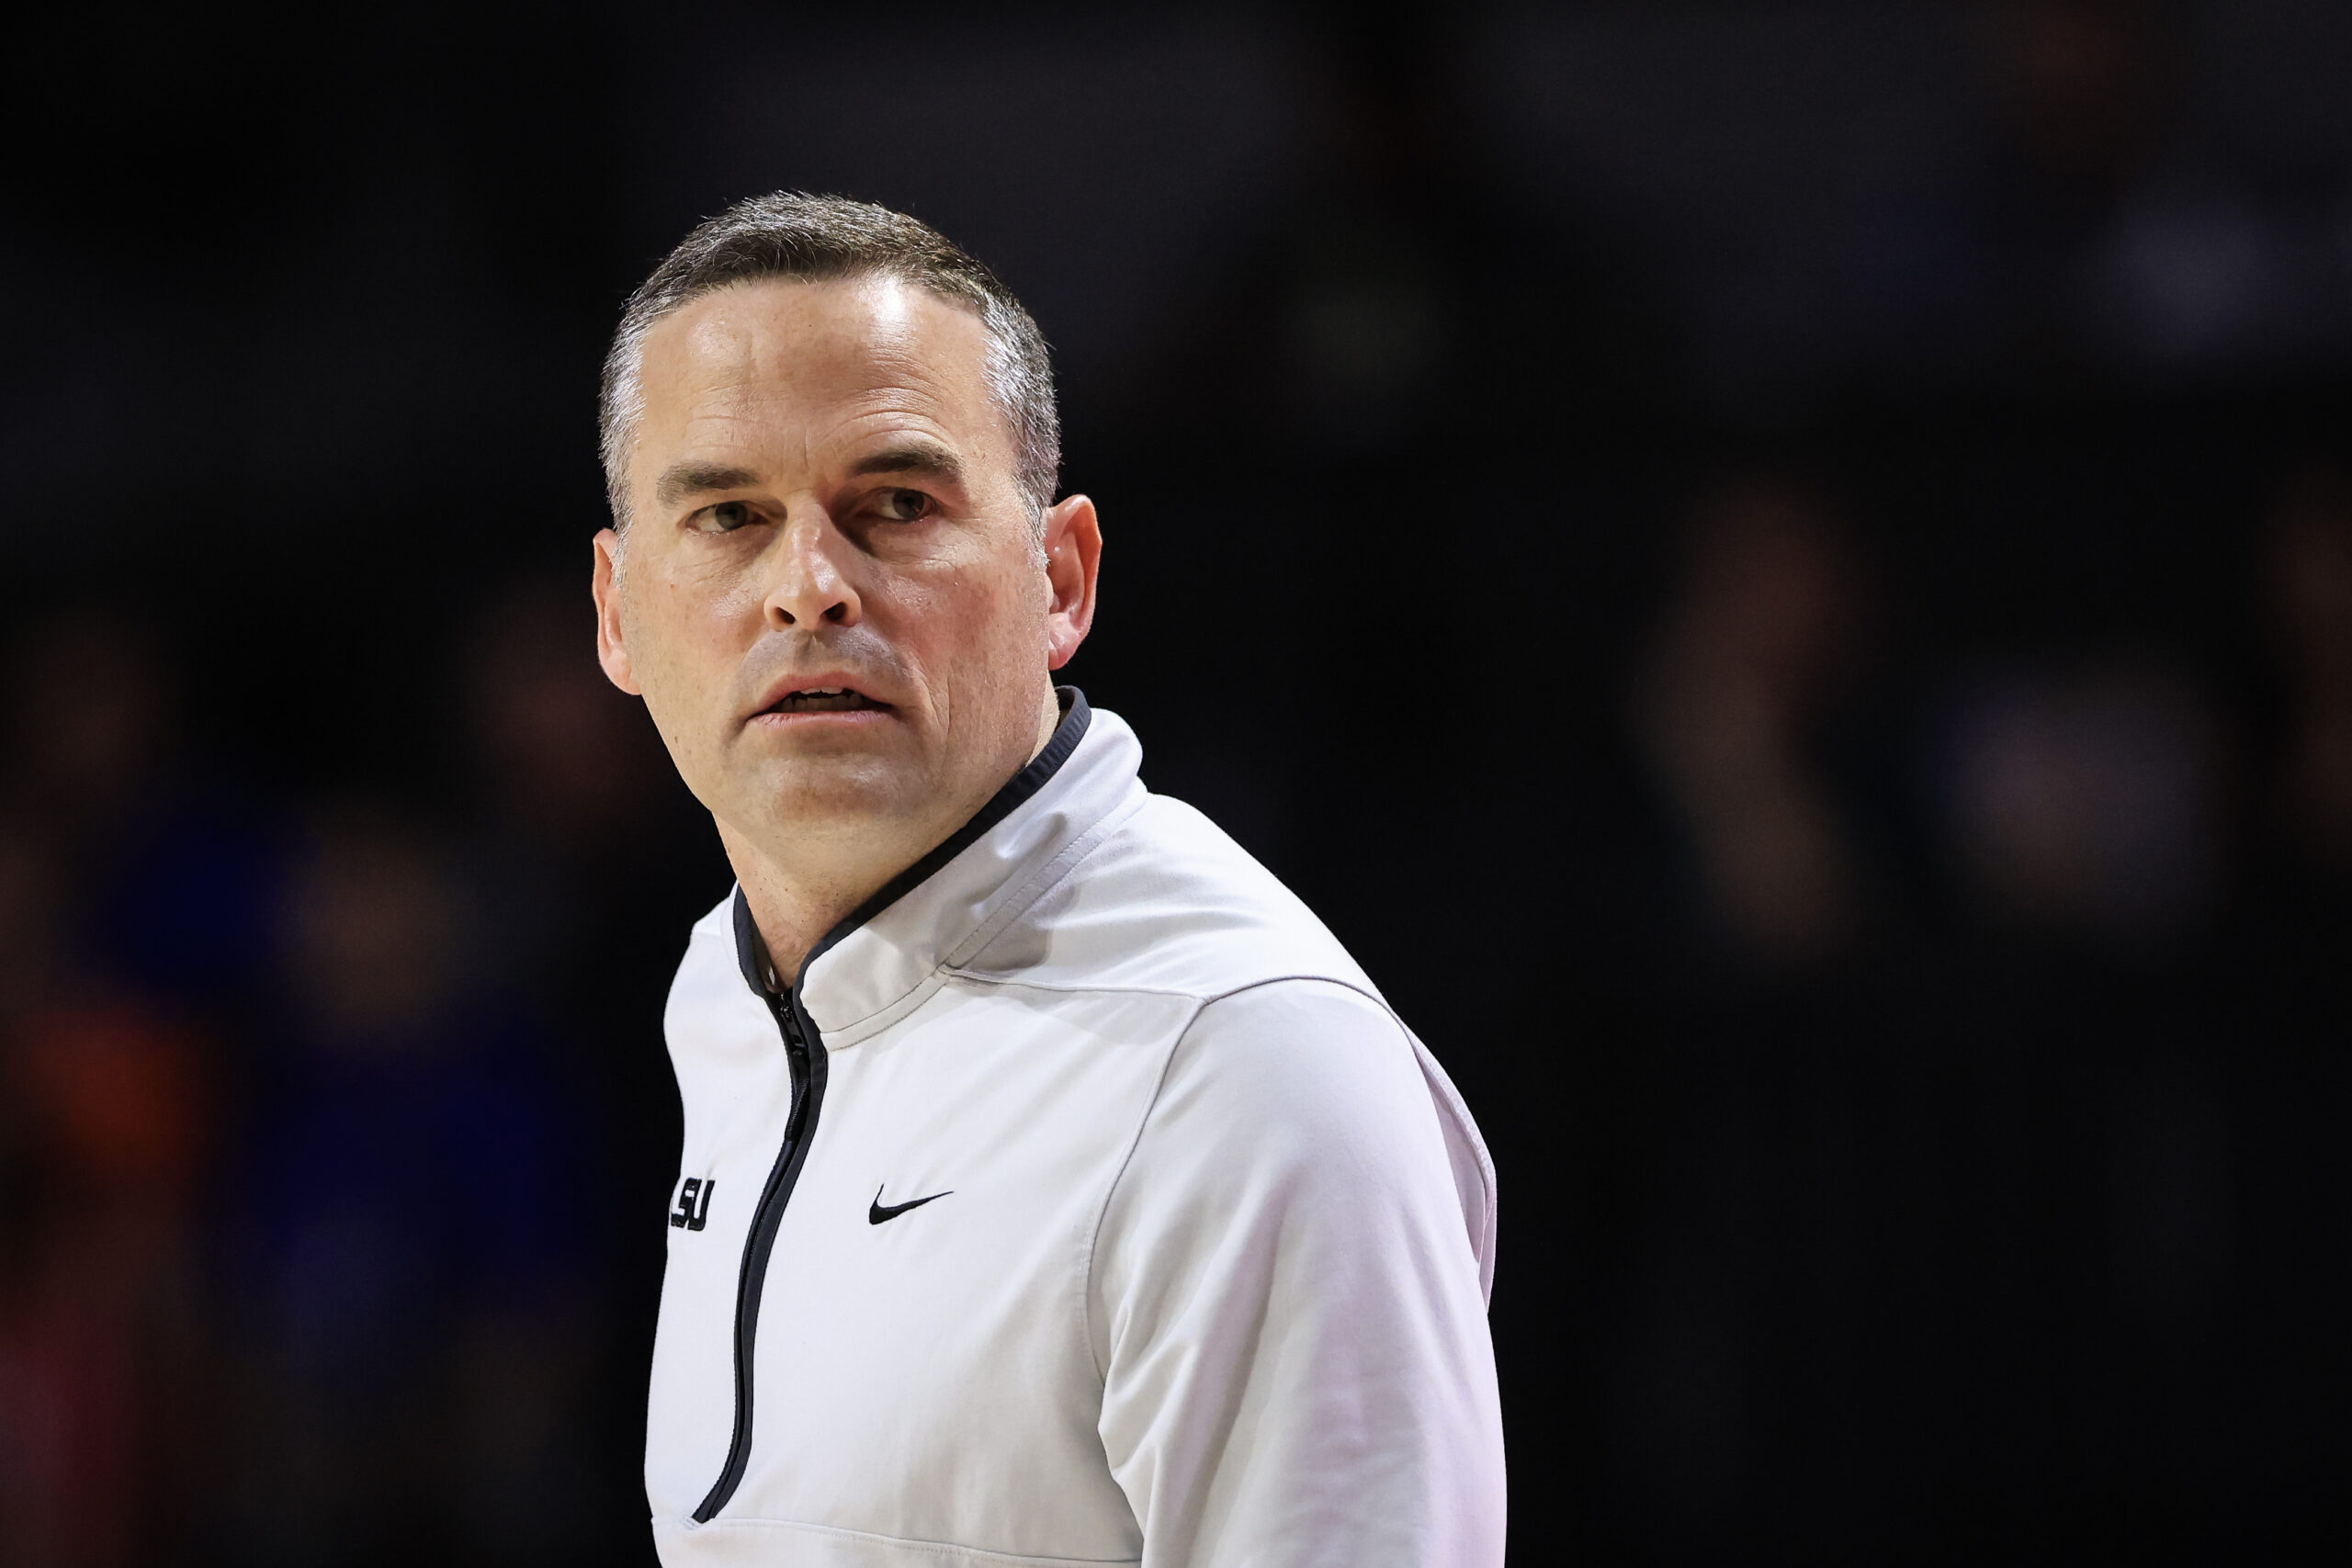 LSU Men’s Basketball Transfer Portal Tracker: Who’s in, out after frustrating Year 1 under Matt McMahon